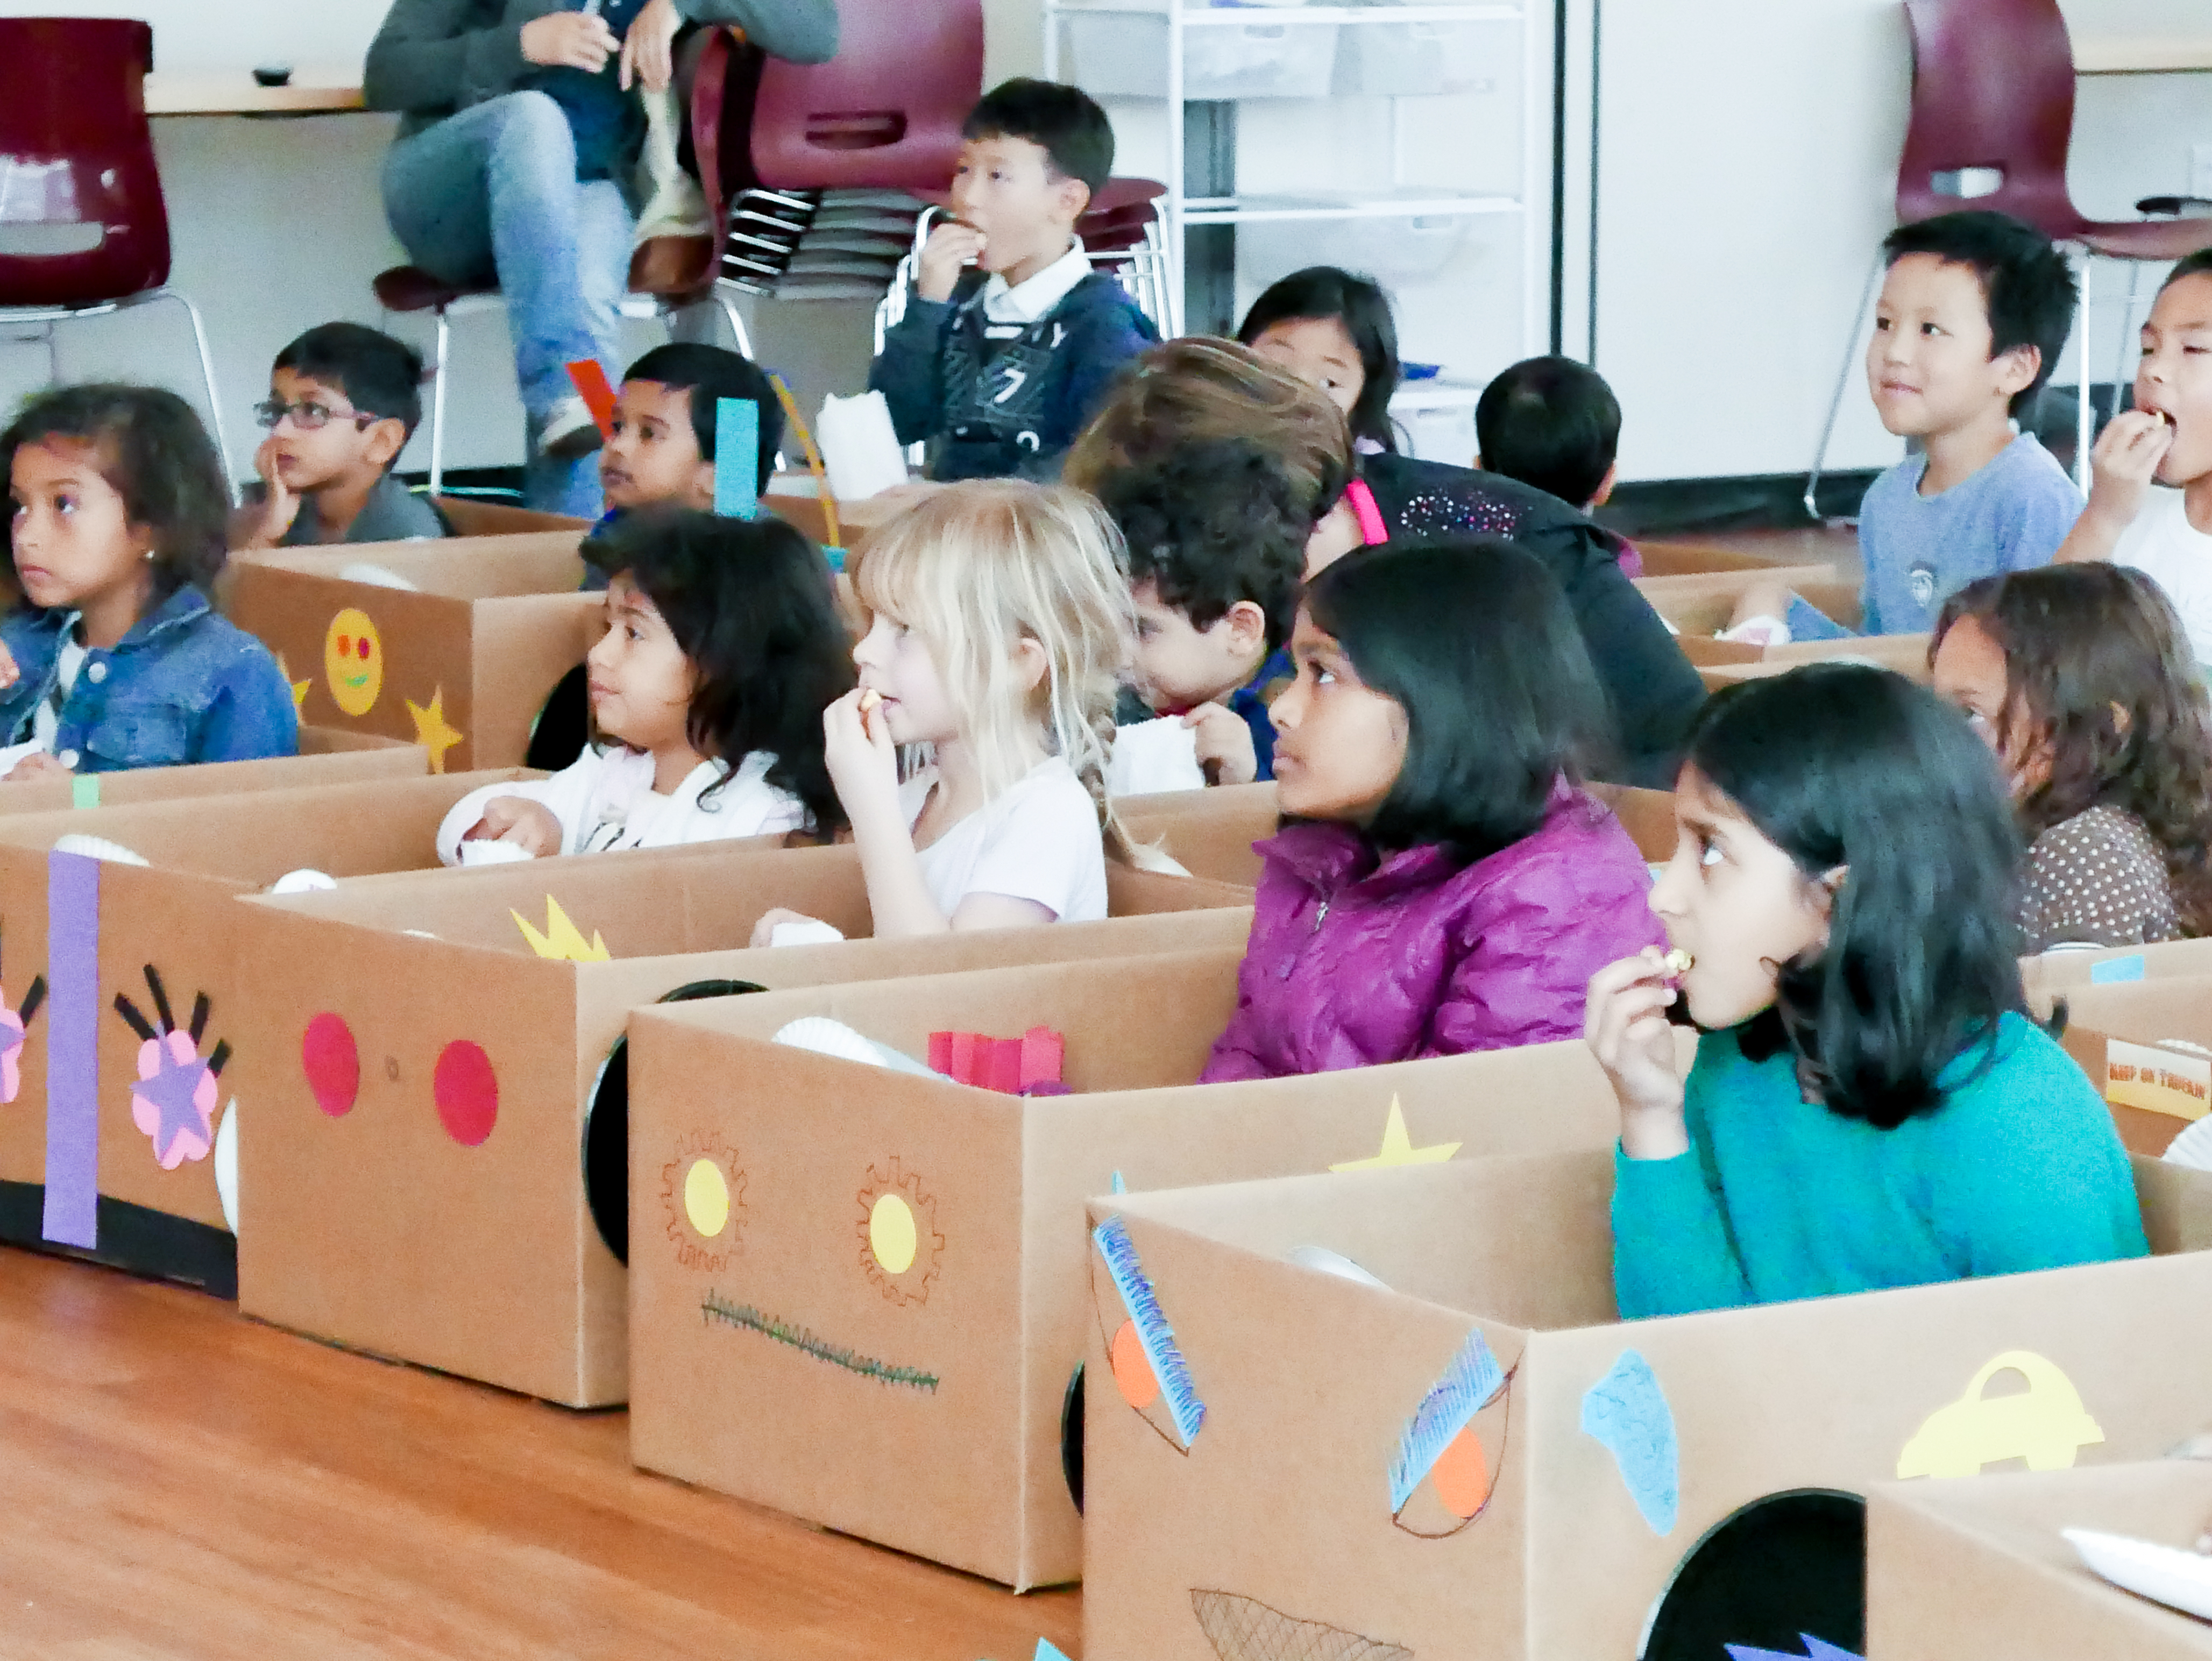 Several kids sitting in home-made cars. The cars are made from cardboard boxes that are decorated. 